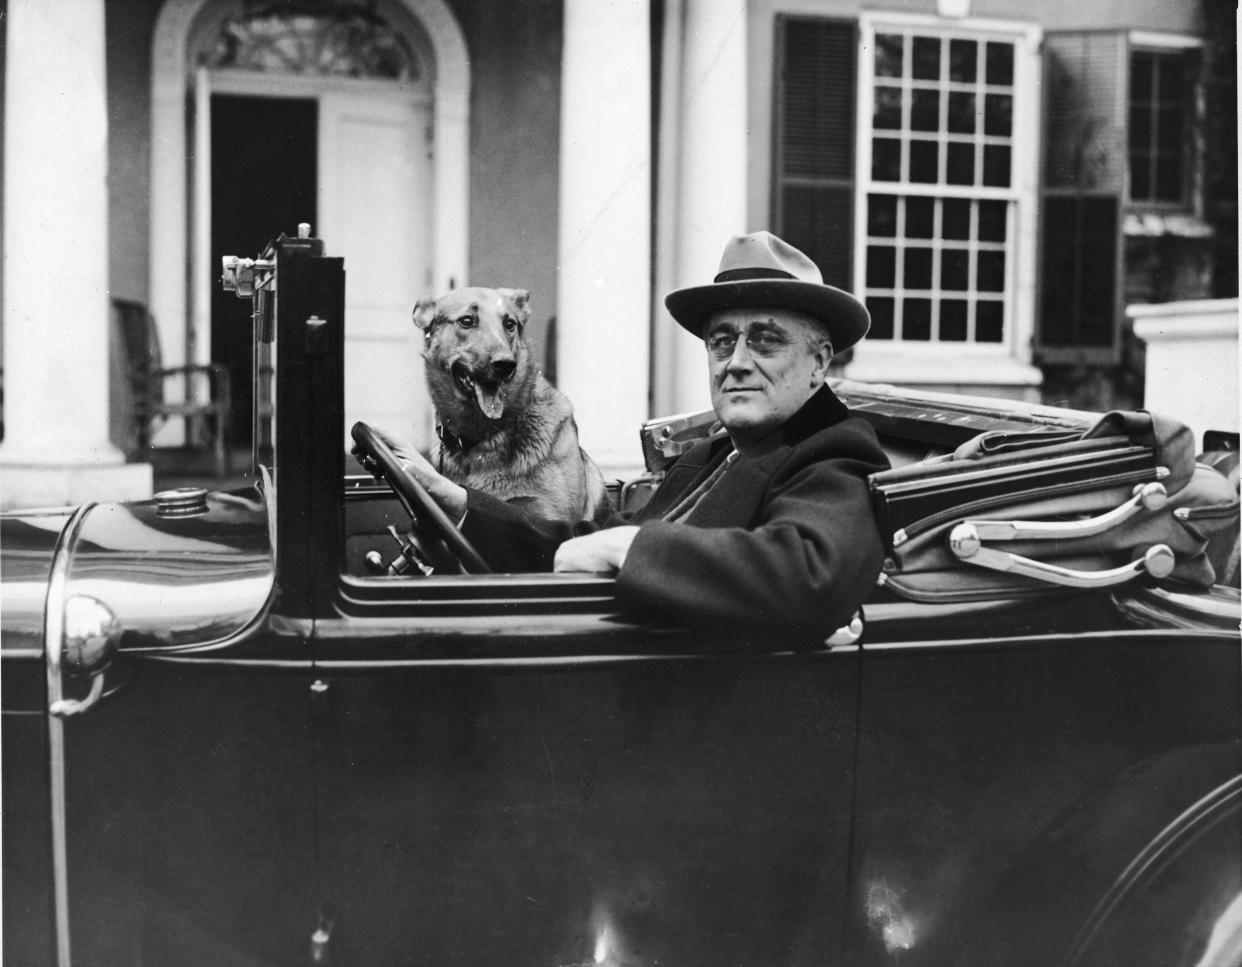 Portrait of American President Franklin Delano Roosevelt behind the wheel of his car outside his home in Hyde Park, New York, mid 1930s. (Getty Images)